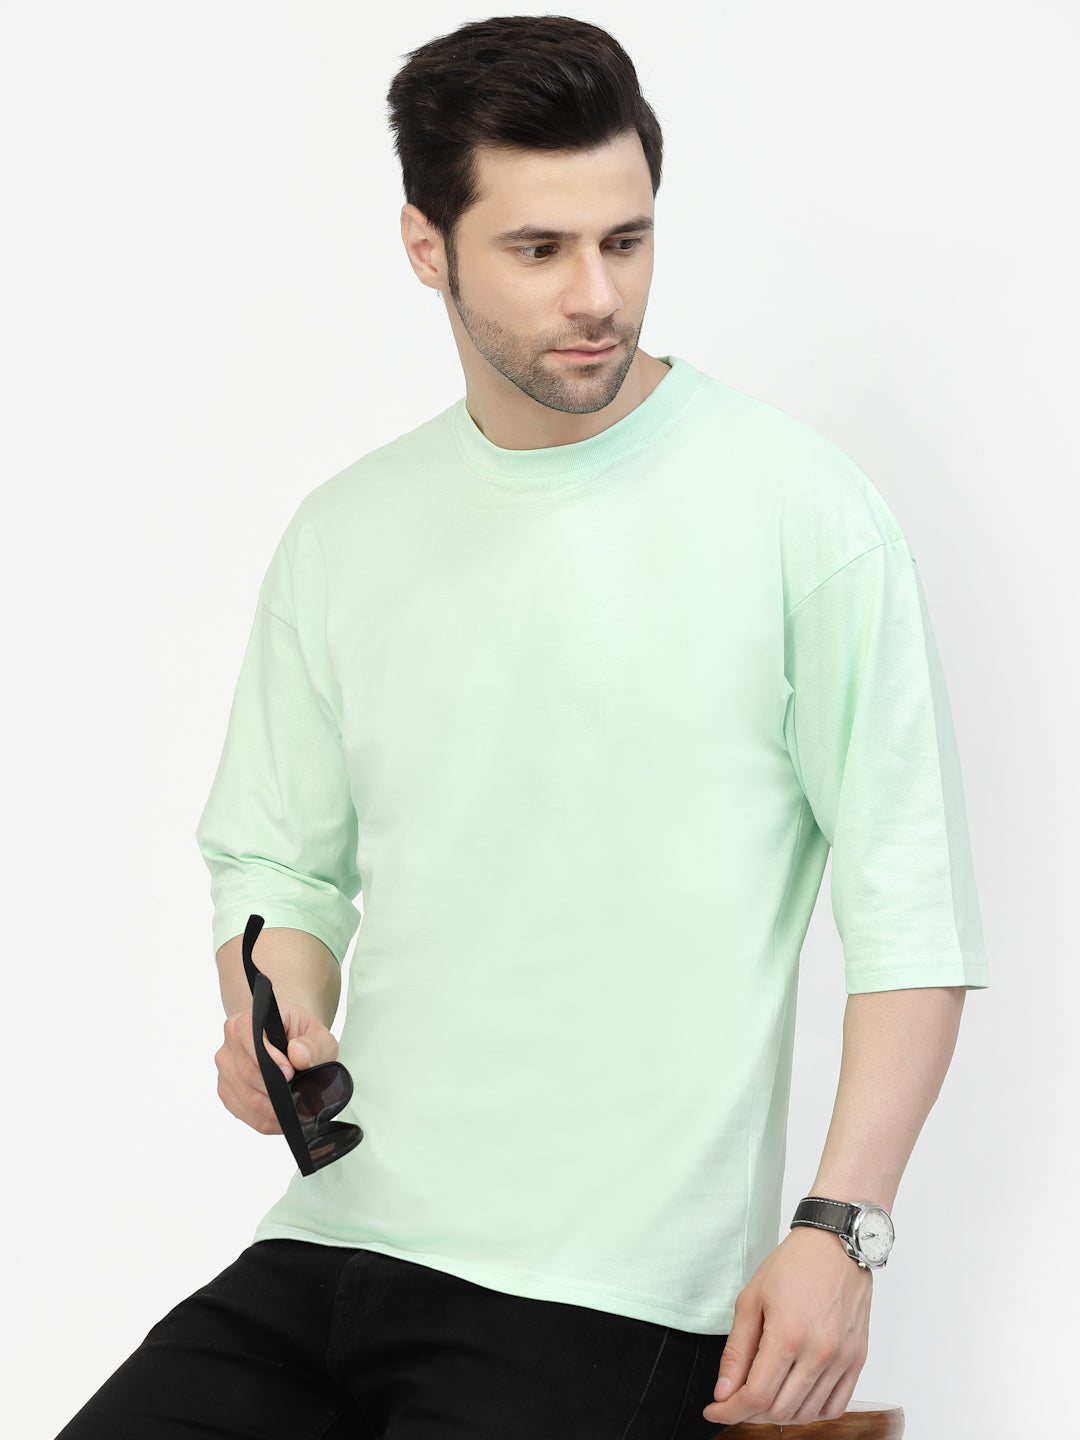 The Berlin Tee in Pistachio Green Vintage Ribbed Tee T Shirt Rib Knit Tee  100% Cotton XS S -  Canada